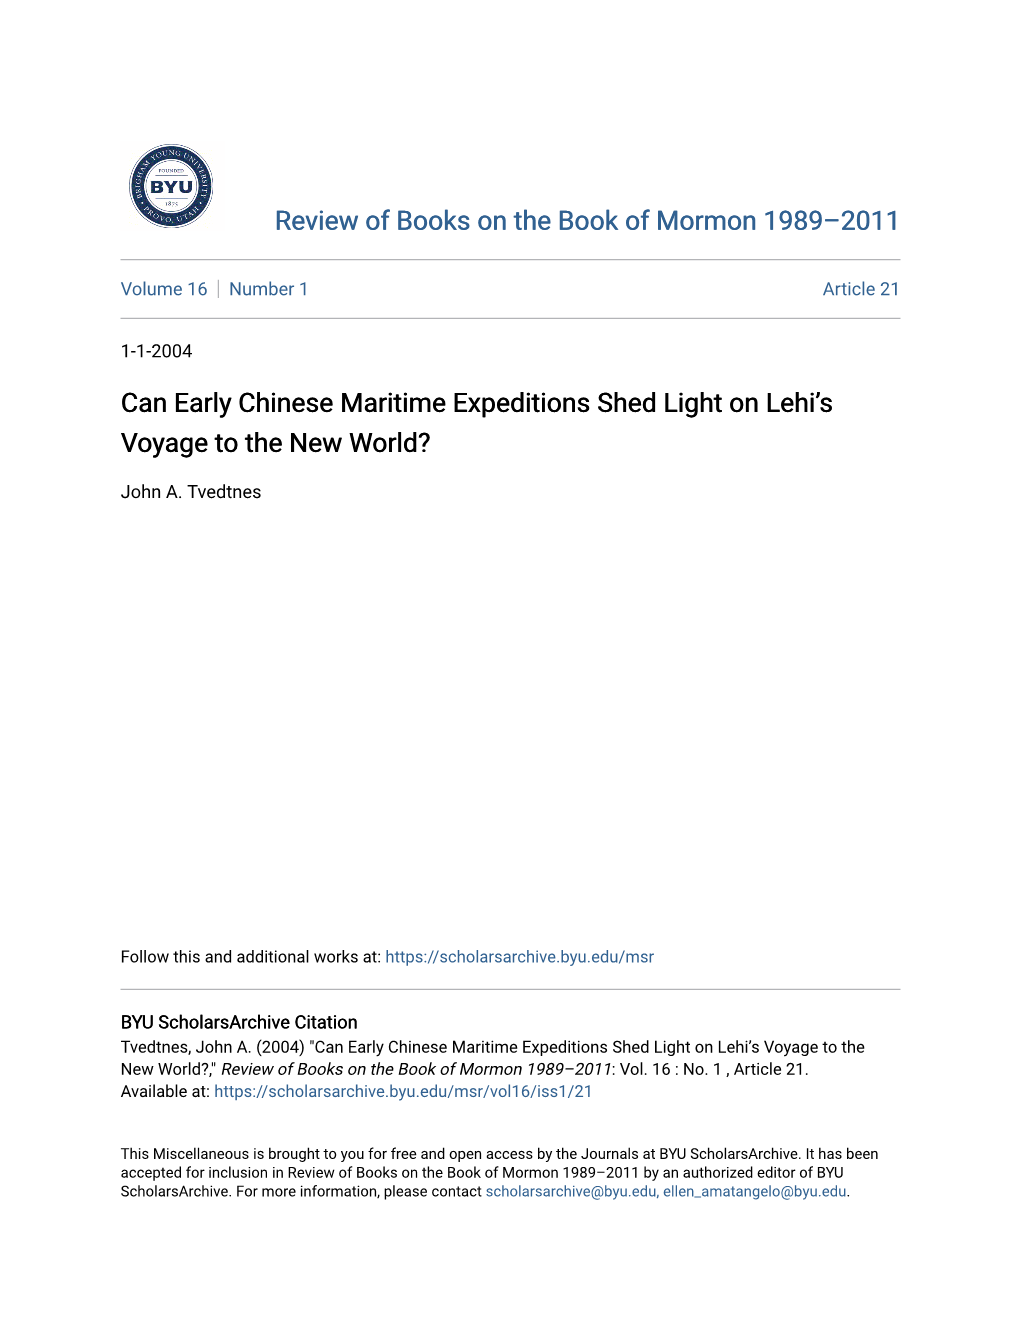 Can Early Chinese Maritime Expeditions Shed Light on Lehi's